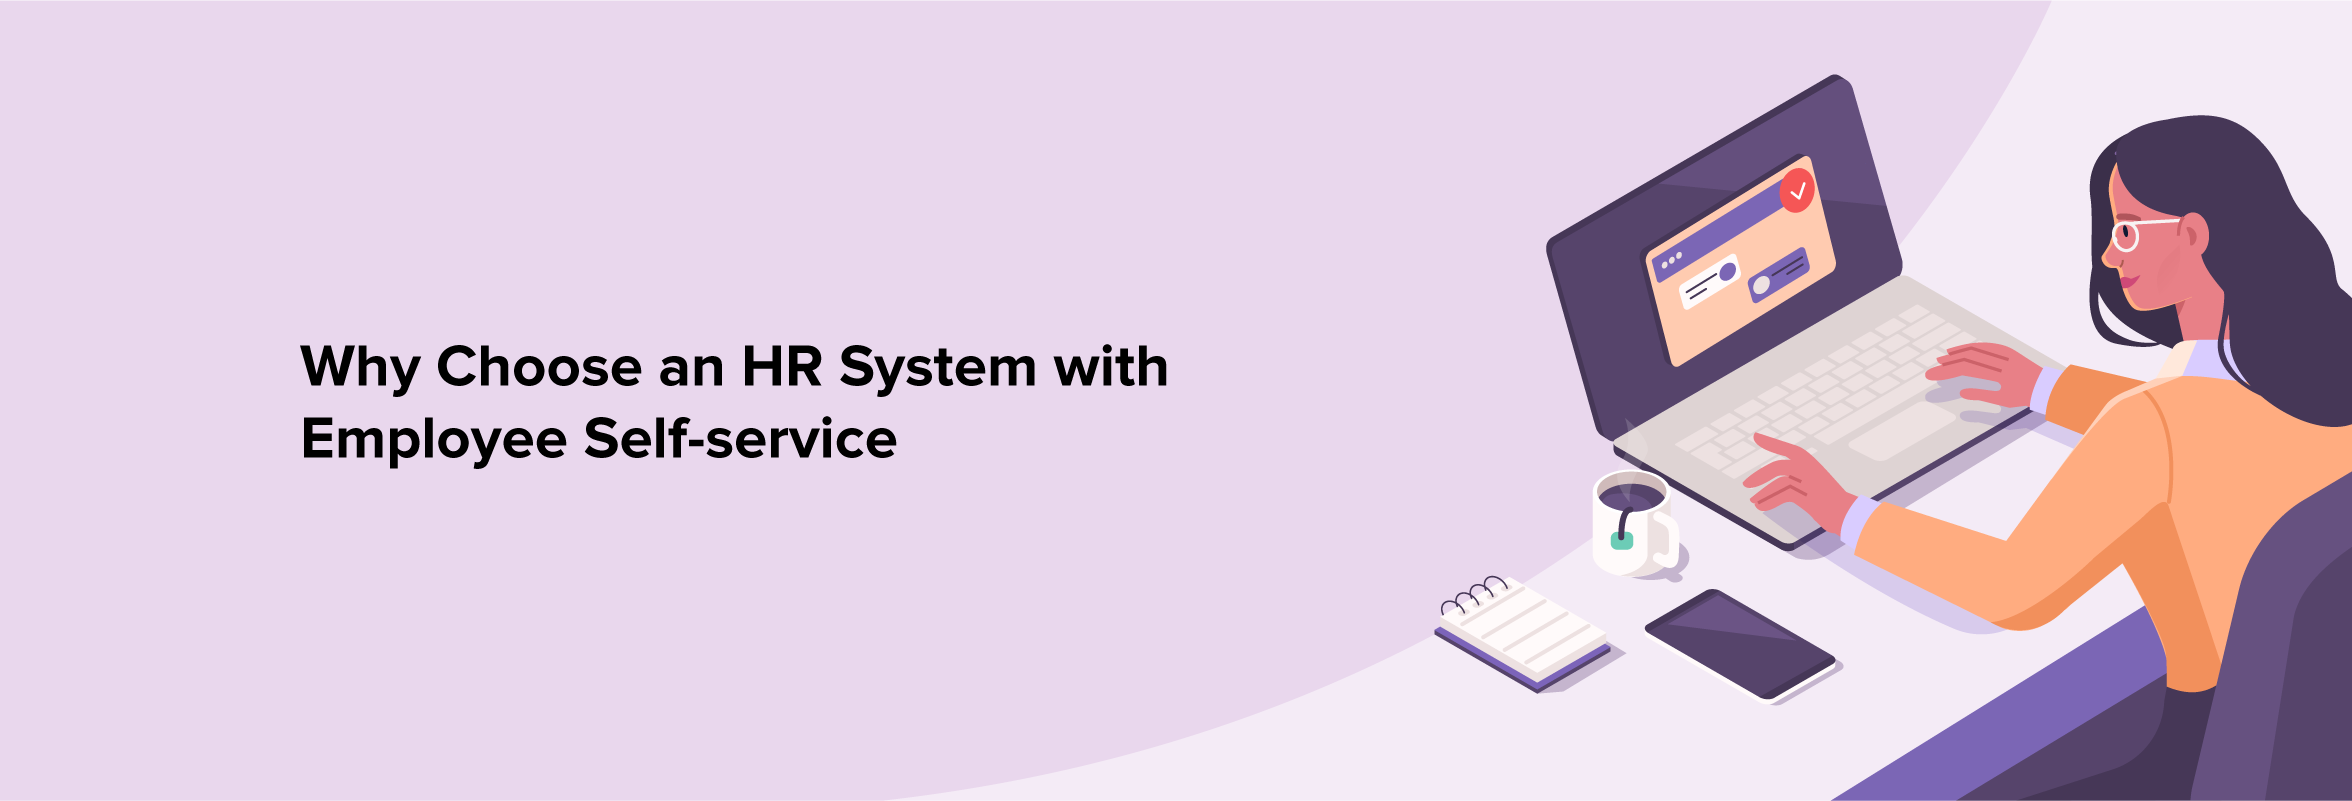 Why Choose an HR System with Employee Self-service